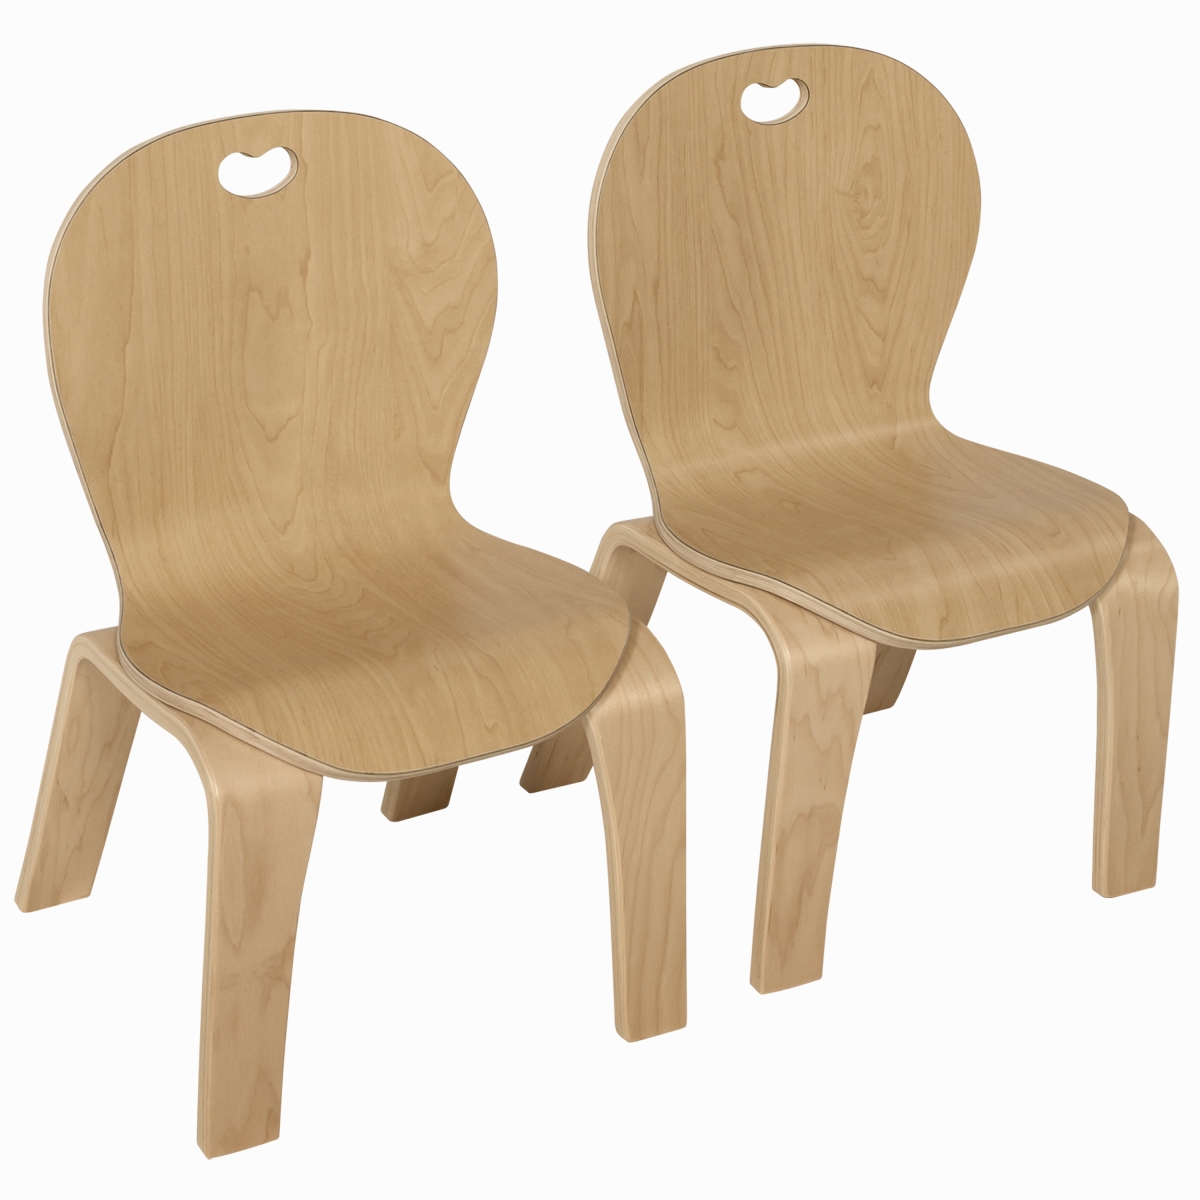 Mh881402 14 In. Bentwood Kids Chair - Set Of 2